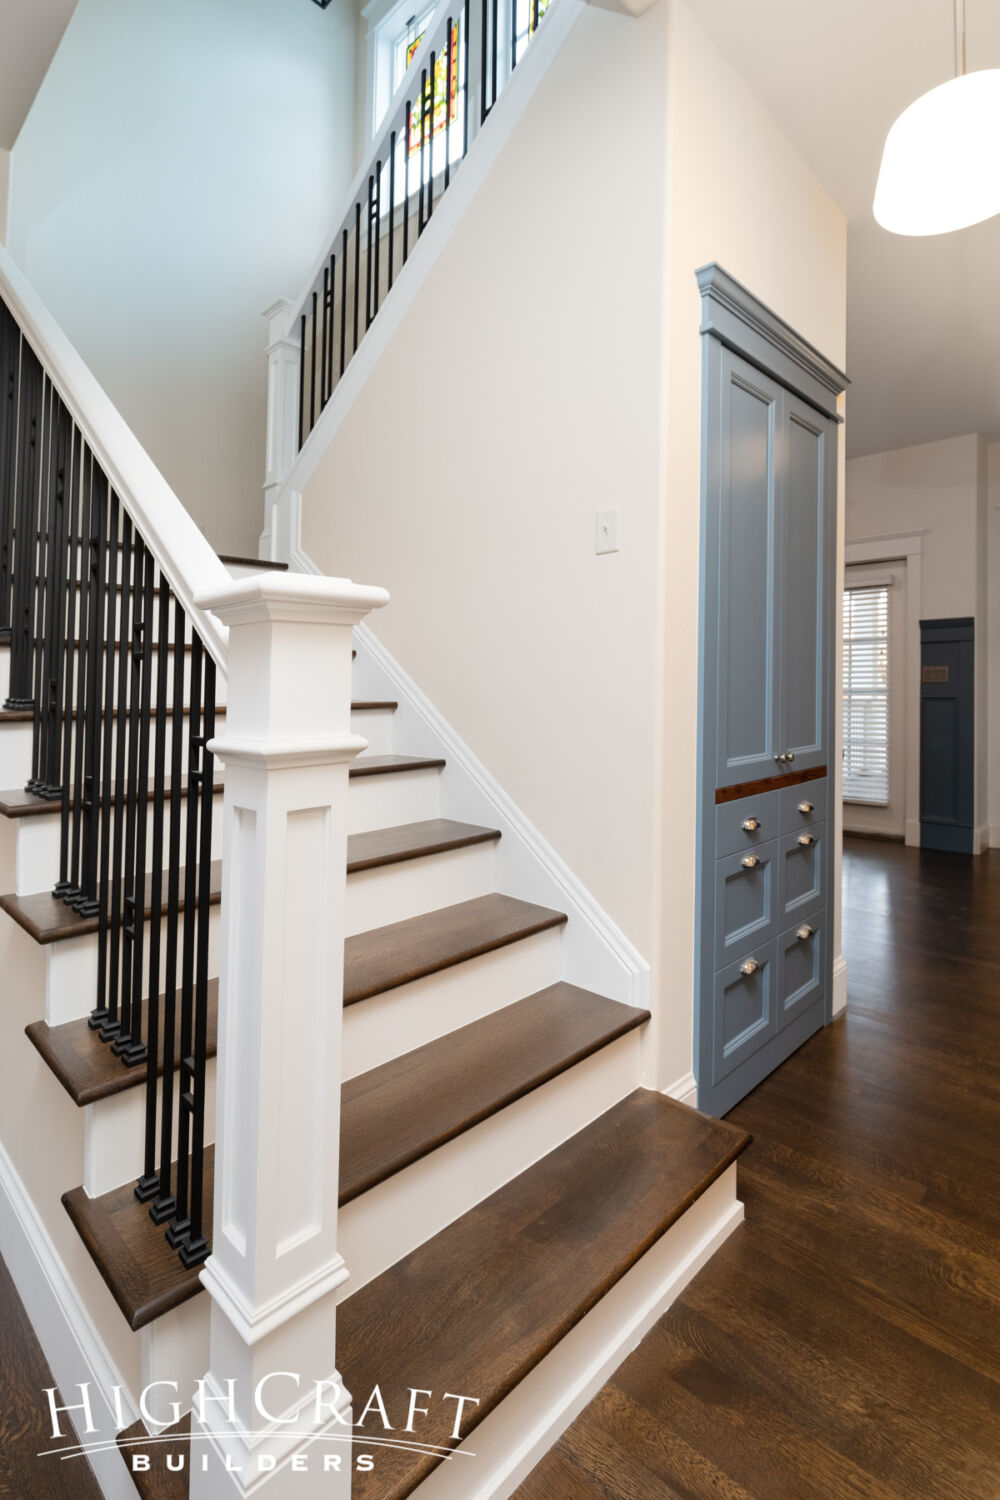 Eclectic-Remodel-in-Old-Town-Hardwood-Tread-Stairs-with-Painted-Risers